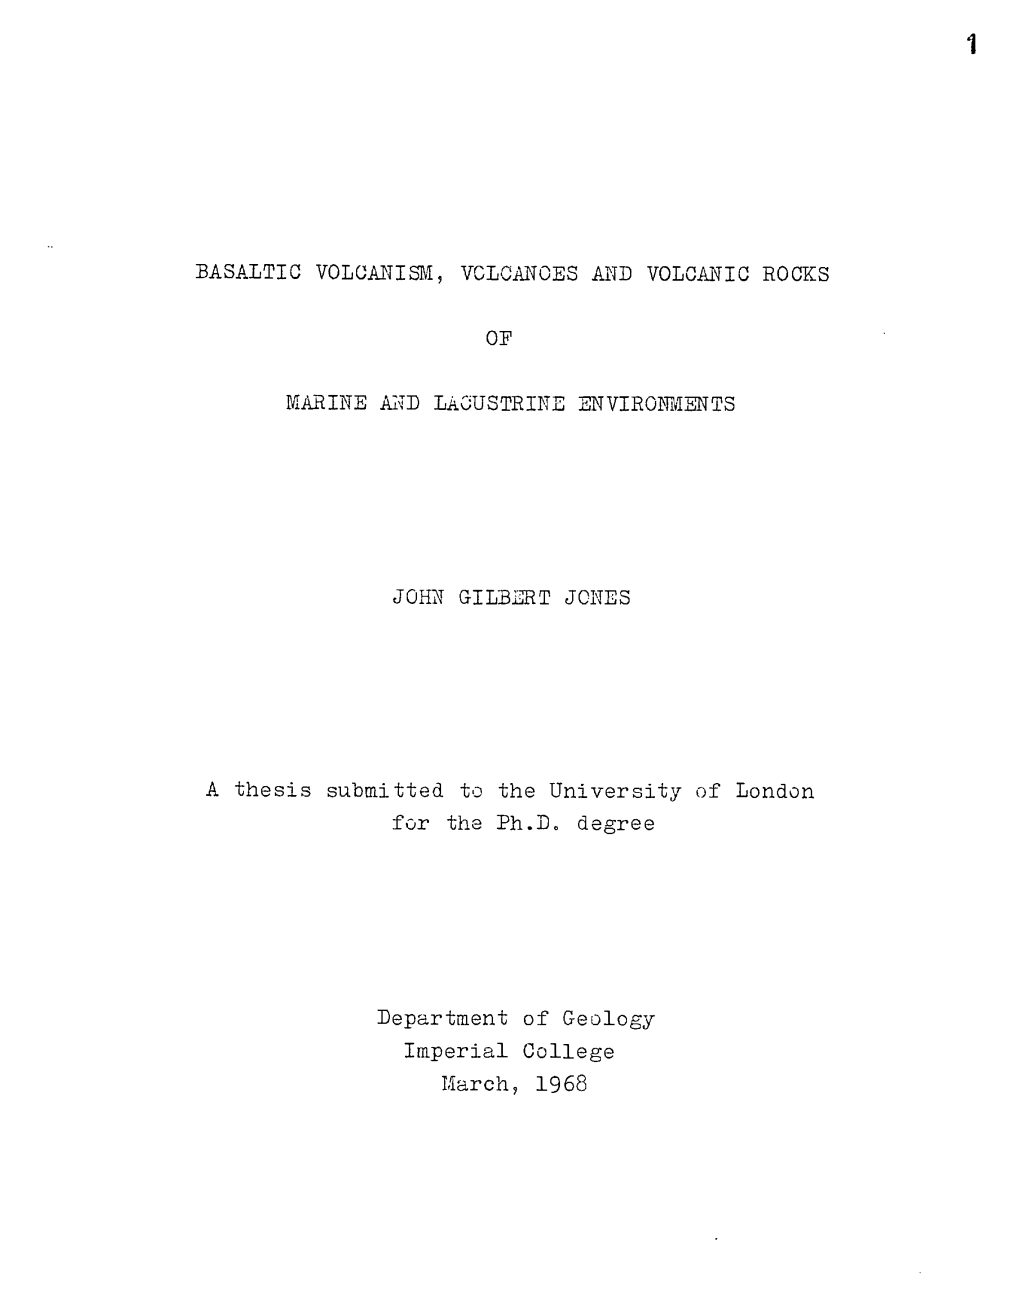 A Thesis Submitted to the University of London for the Ph.D. Degree